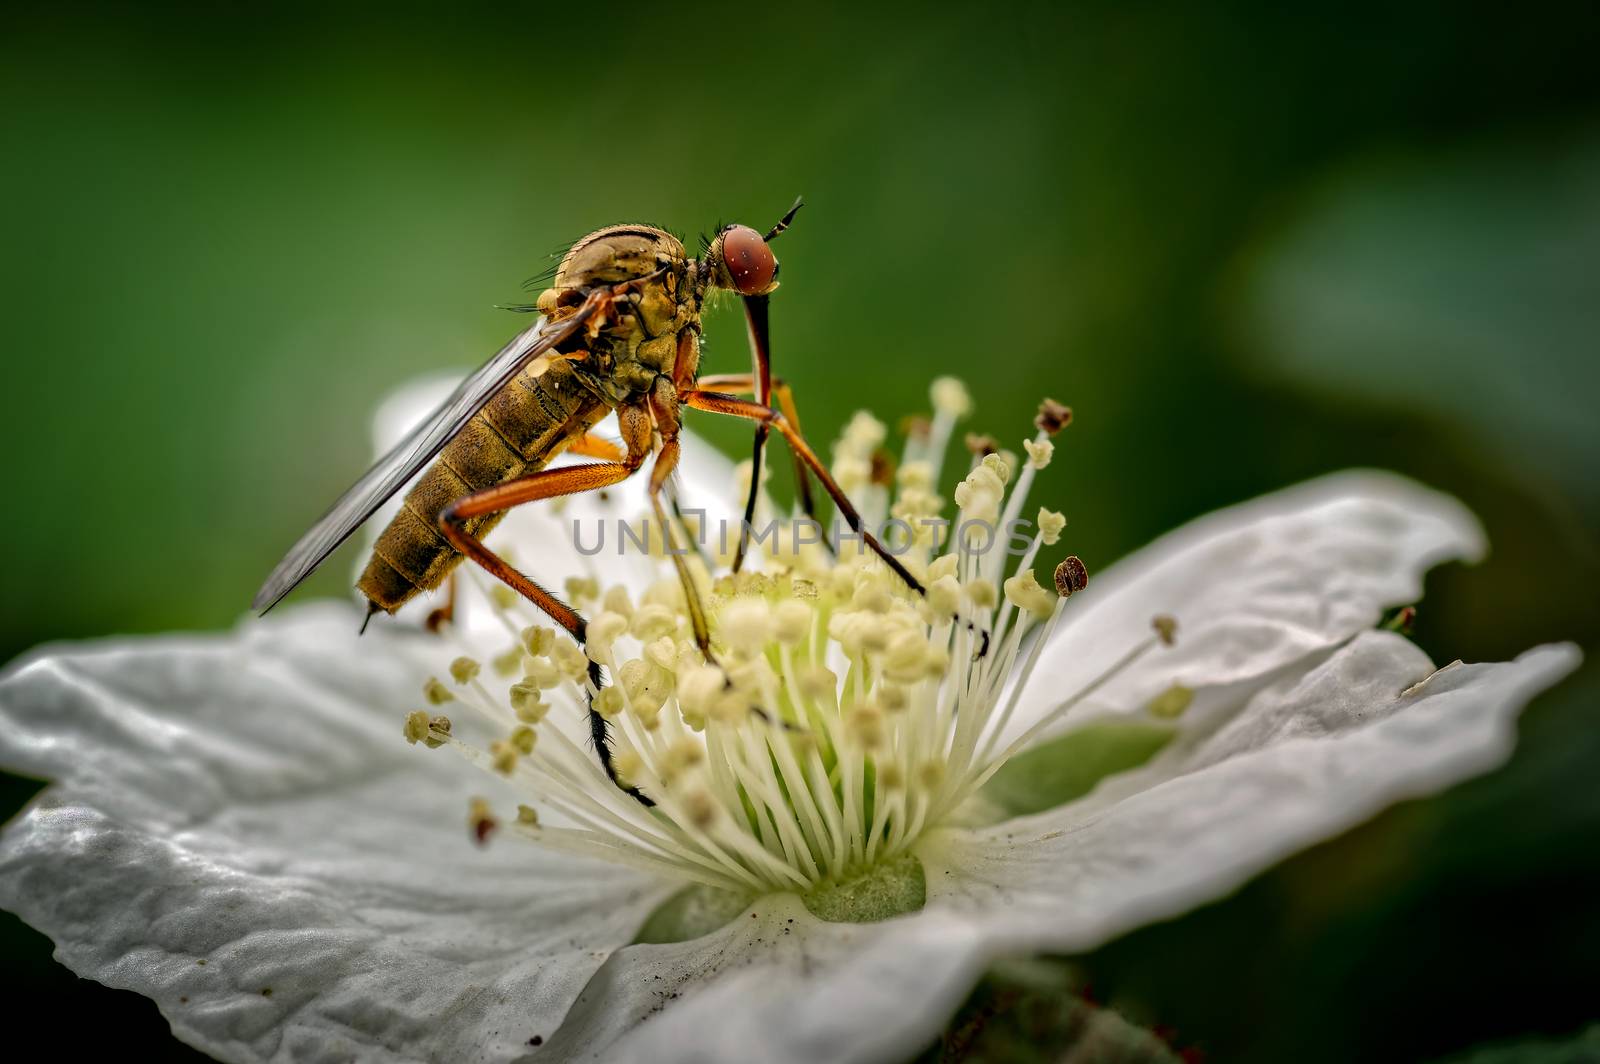 The Dagger Fly seen here is Empis opaca nectaring (feeding) on a dewberry flower. As their name suggests this is a predatory species and catches its prey by impaling it with its extended mouth parts (proboscis) and can be used as biological control agents. However, they also feed on flowers where their long proboscis allows them to reach the nectar and so are also important pollinators. Sometimes also referred to as balloon flies or dance flies.